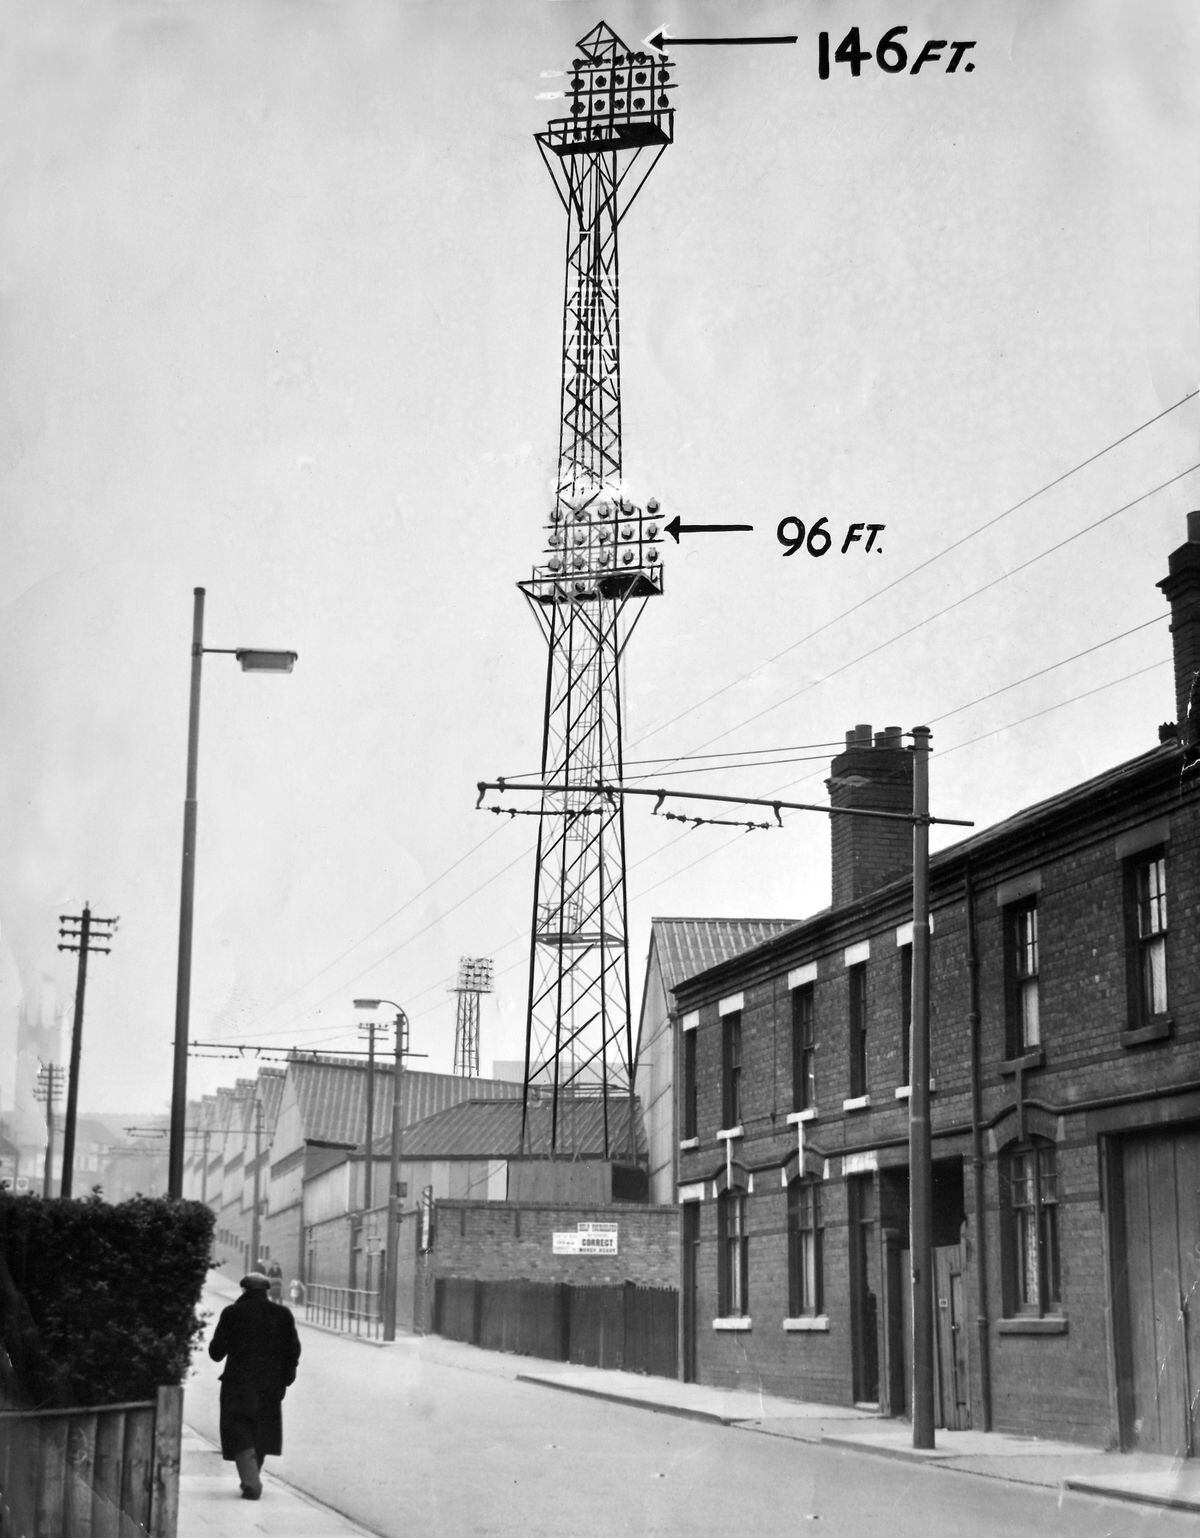 A view from Park Road in April 1957 showing two of the Molineux floodlight pylons, to which the newspaper artist has demonstrated how they would be extended to 146ft in a big upgrade.